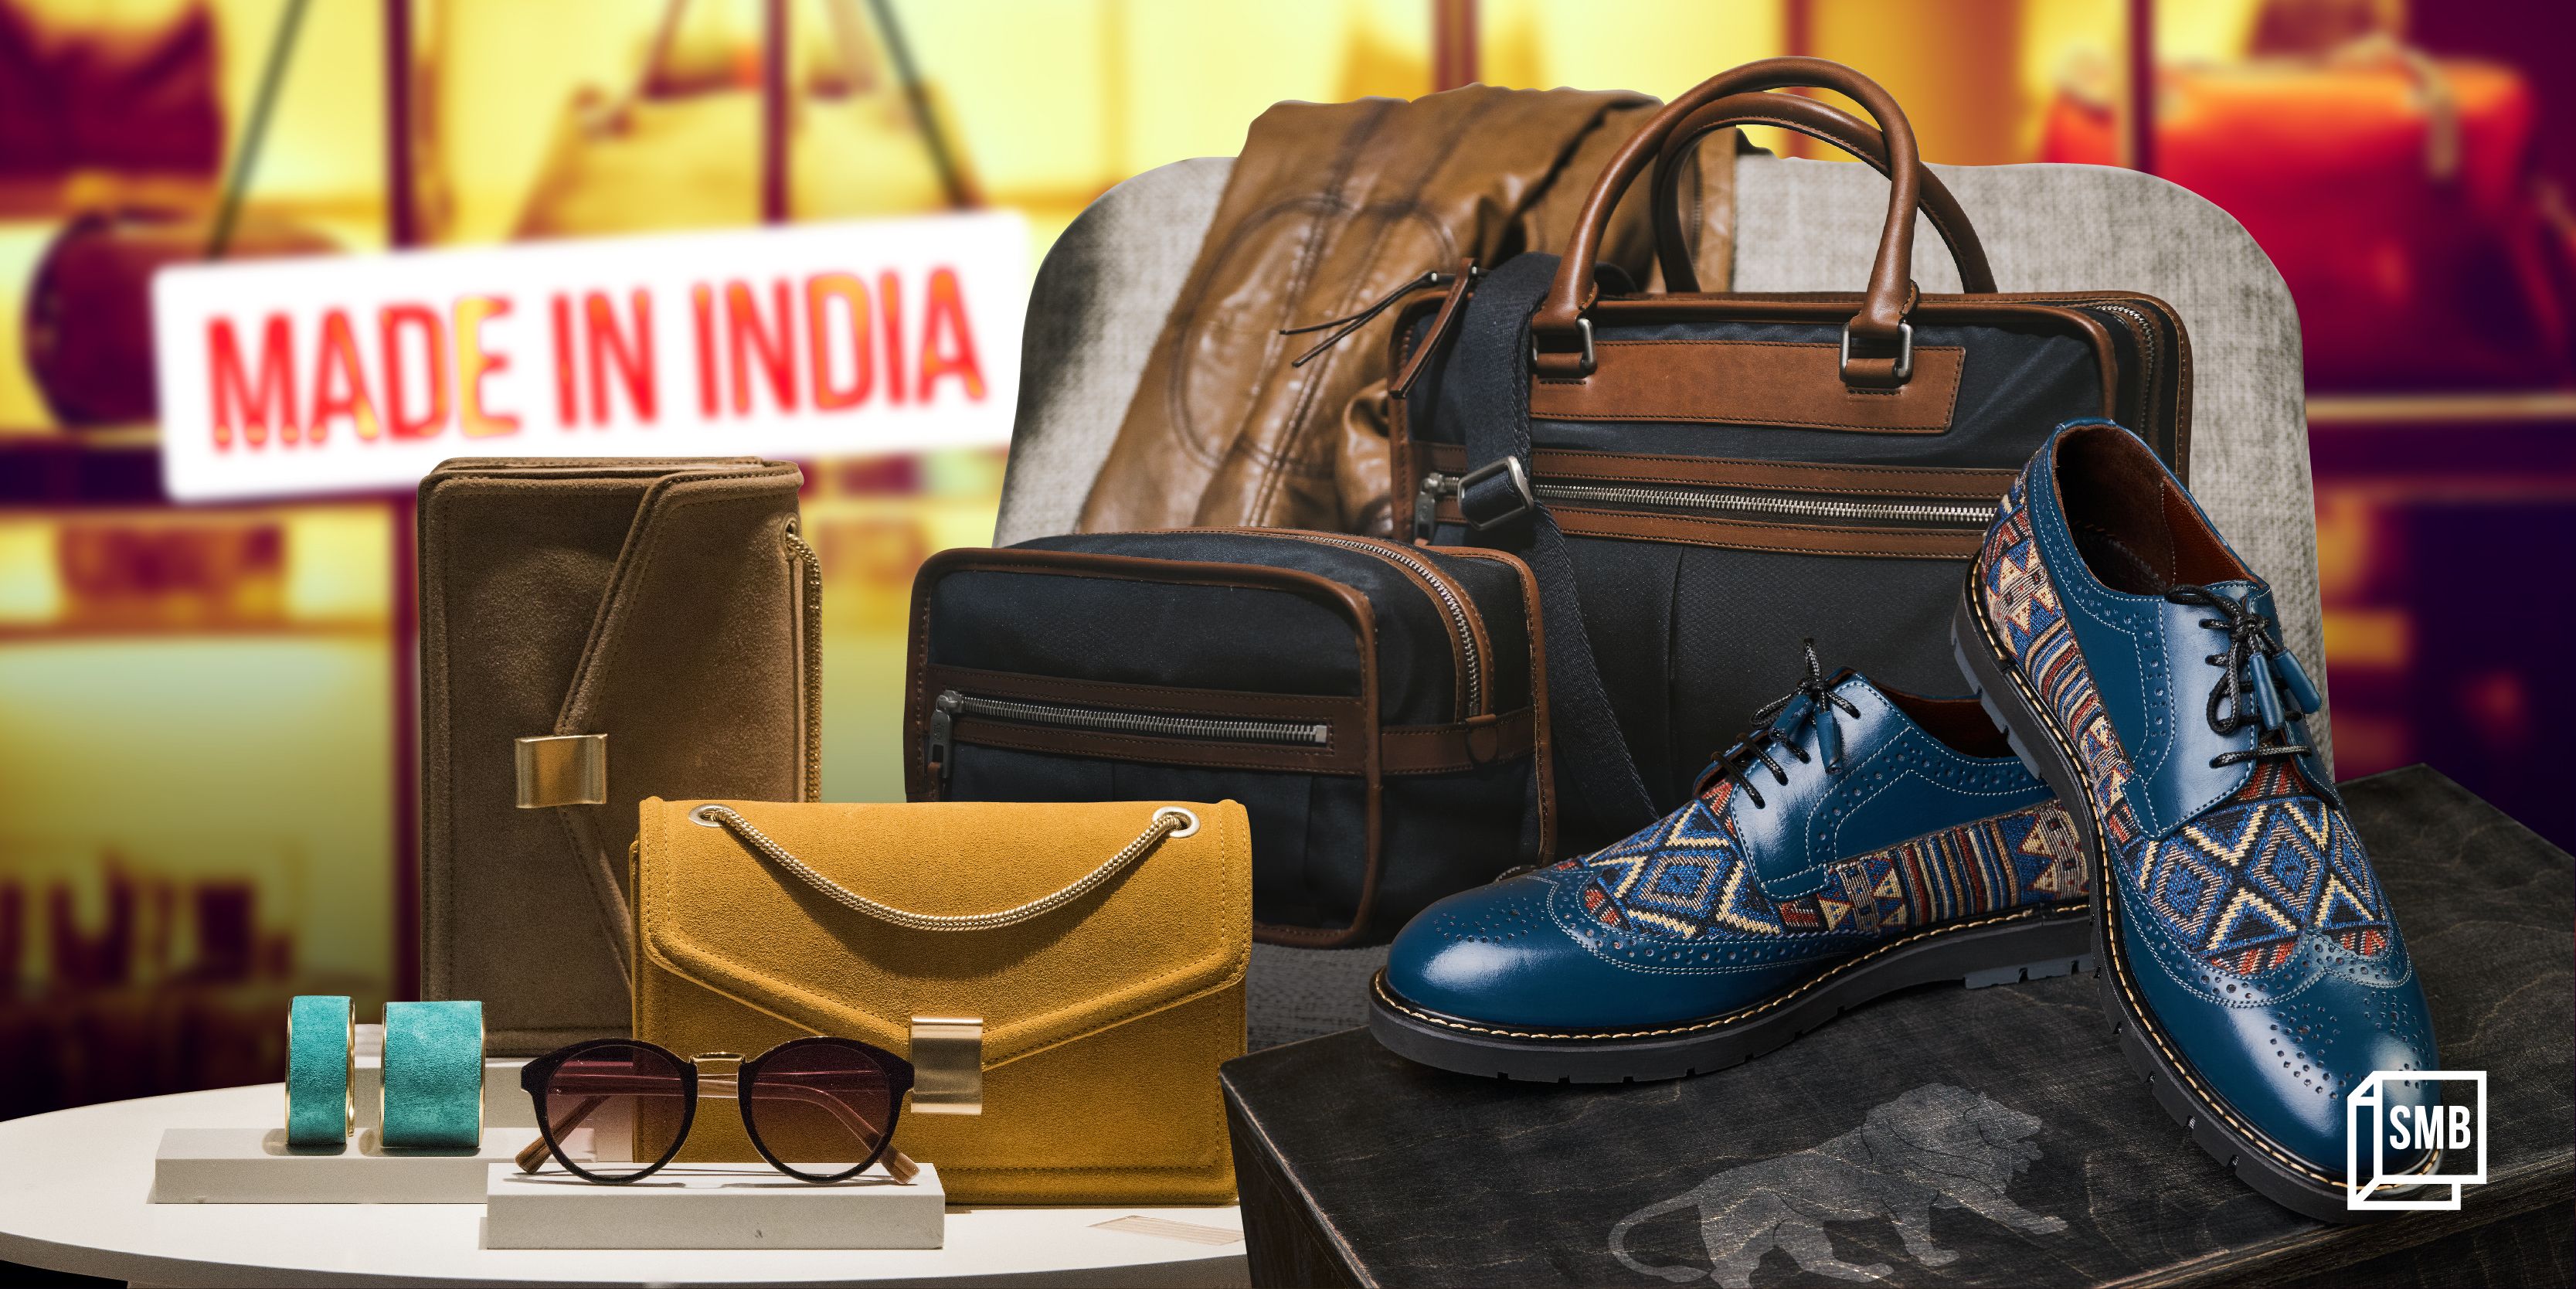 Indian brands check into luxury space to cash in on surging middle class, aspirational youth